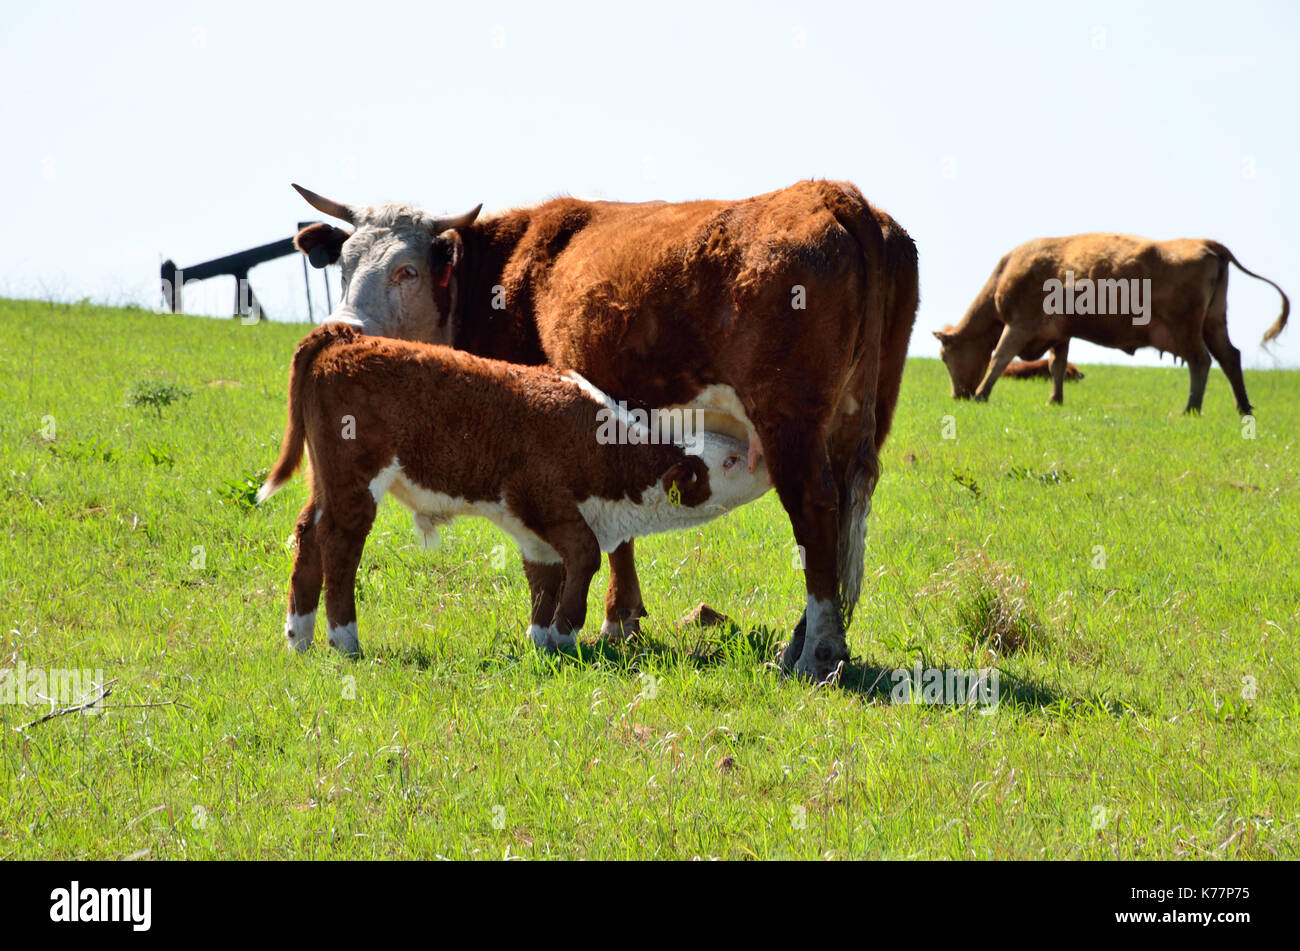 Red Hereford calf suckles while Mom looks on in an Oklahoma field. Stock Photo